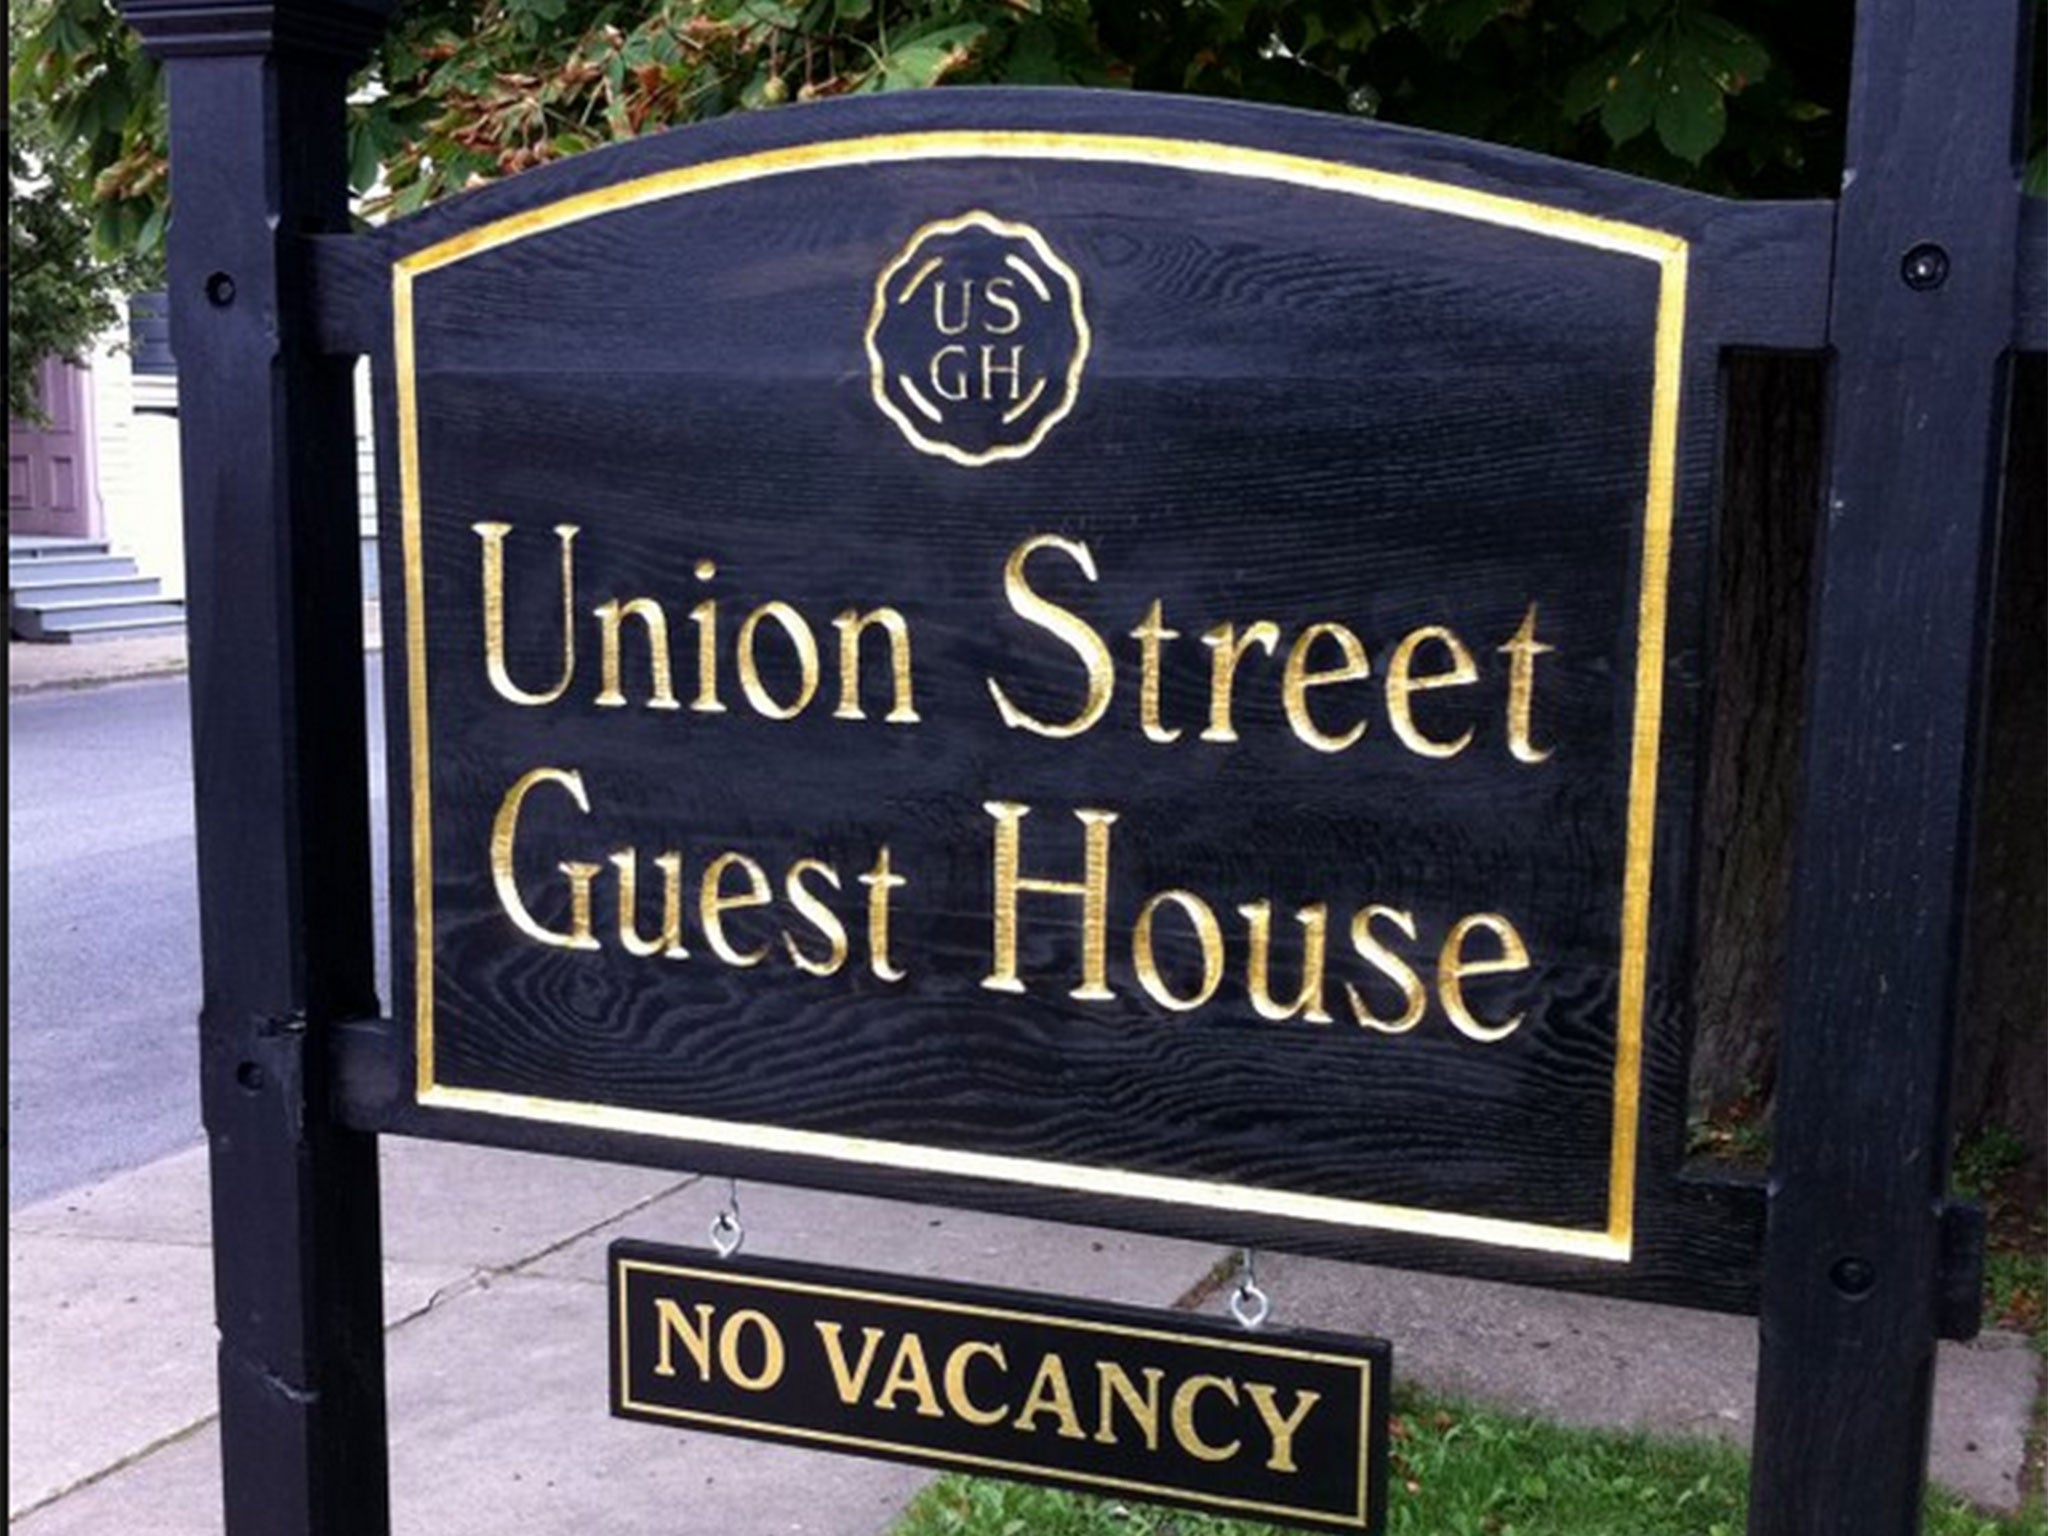 The welcome sign at the Union Stree Guest House